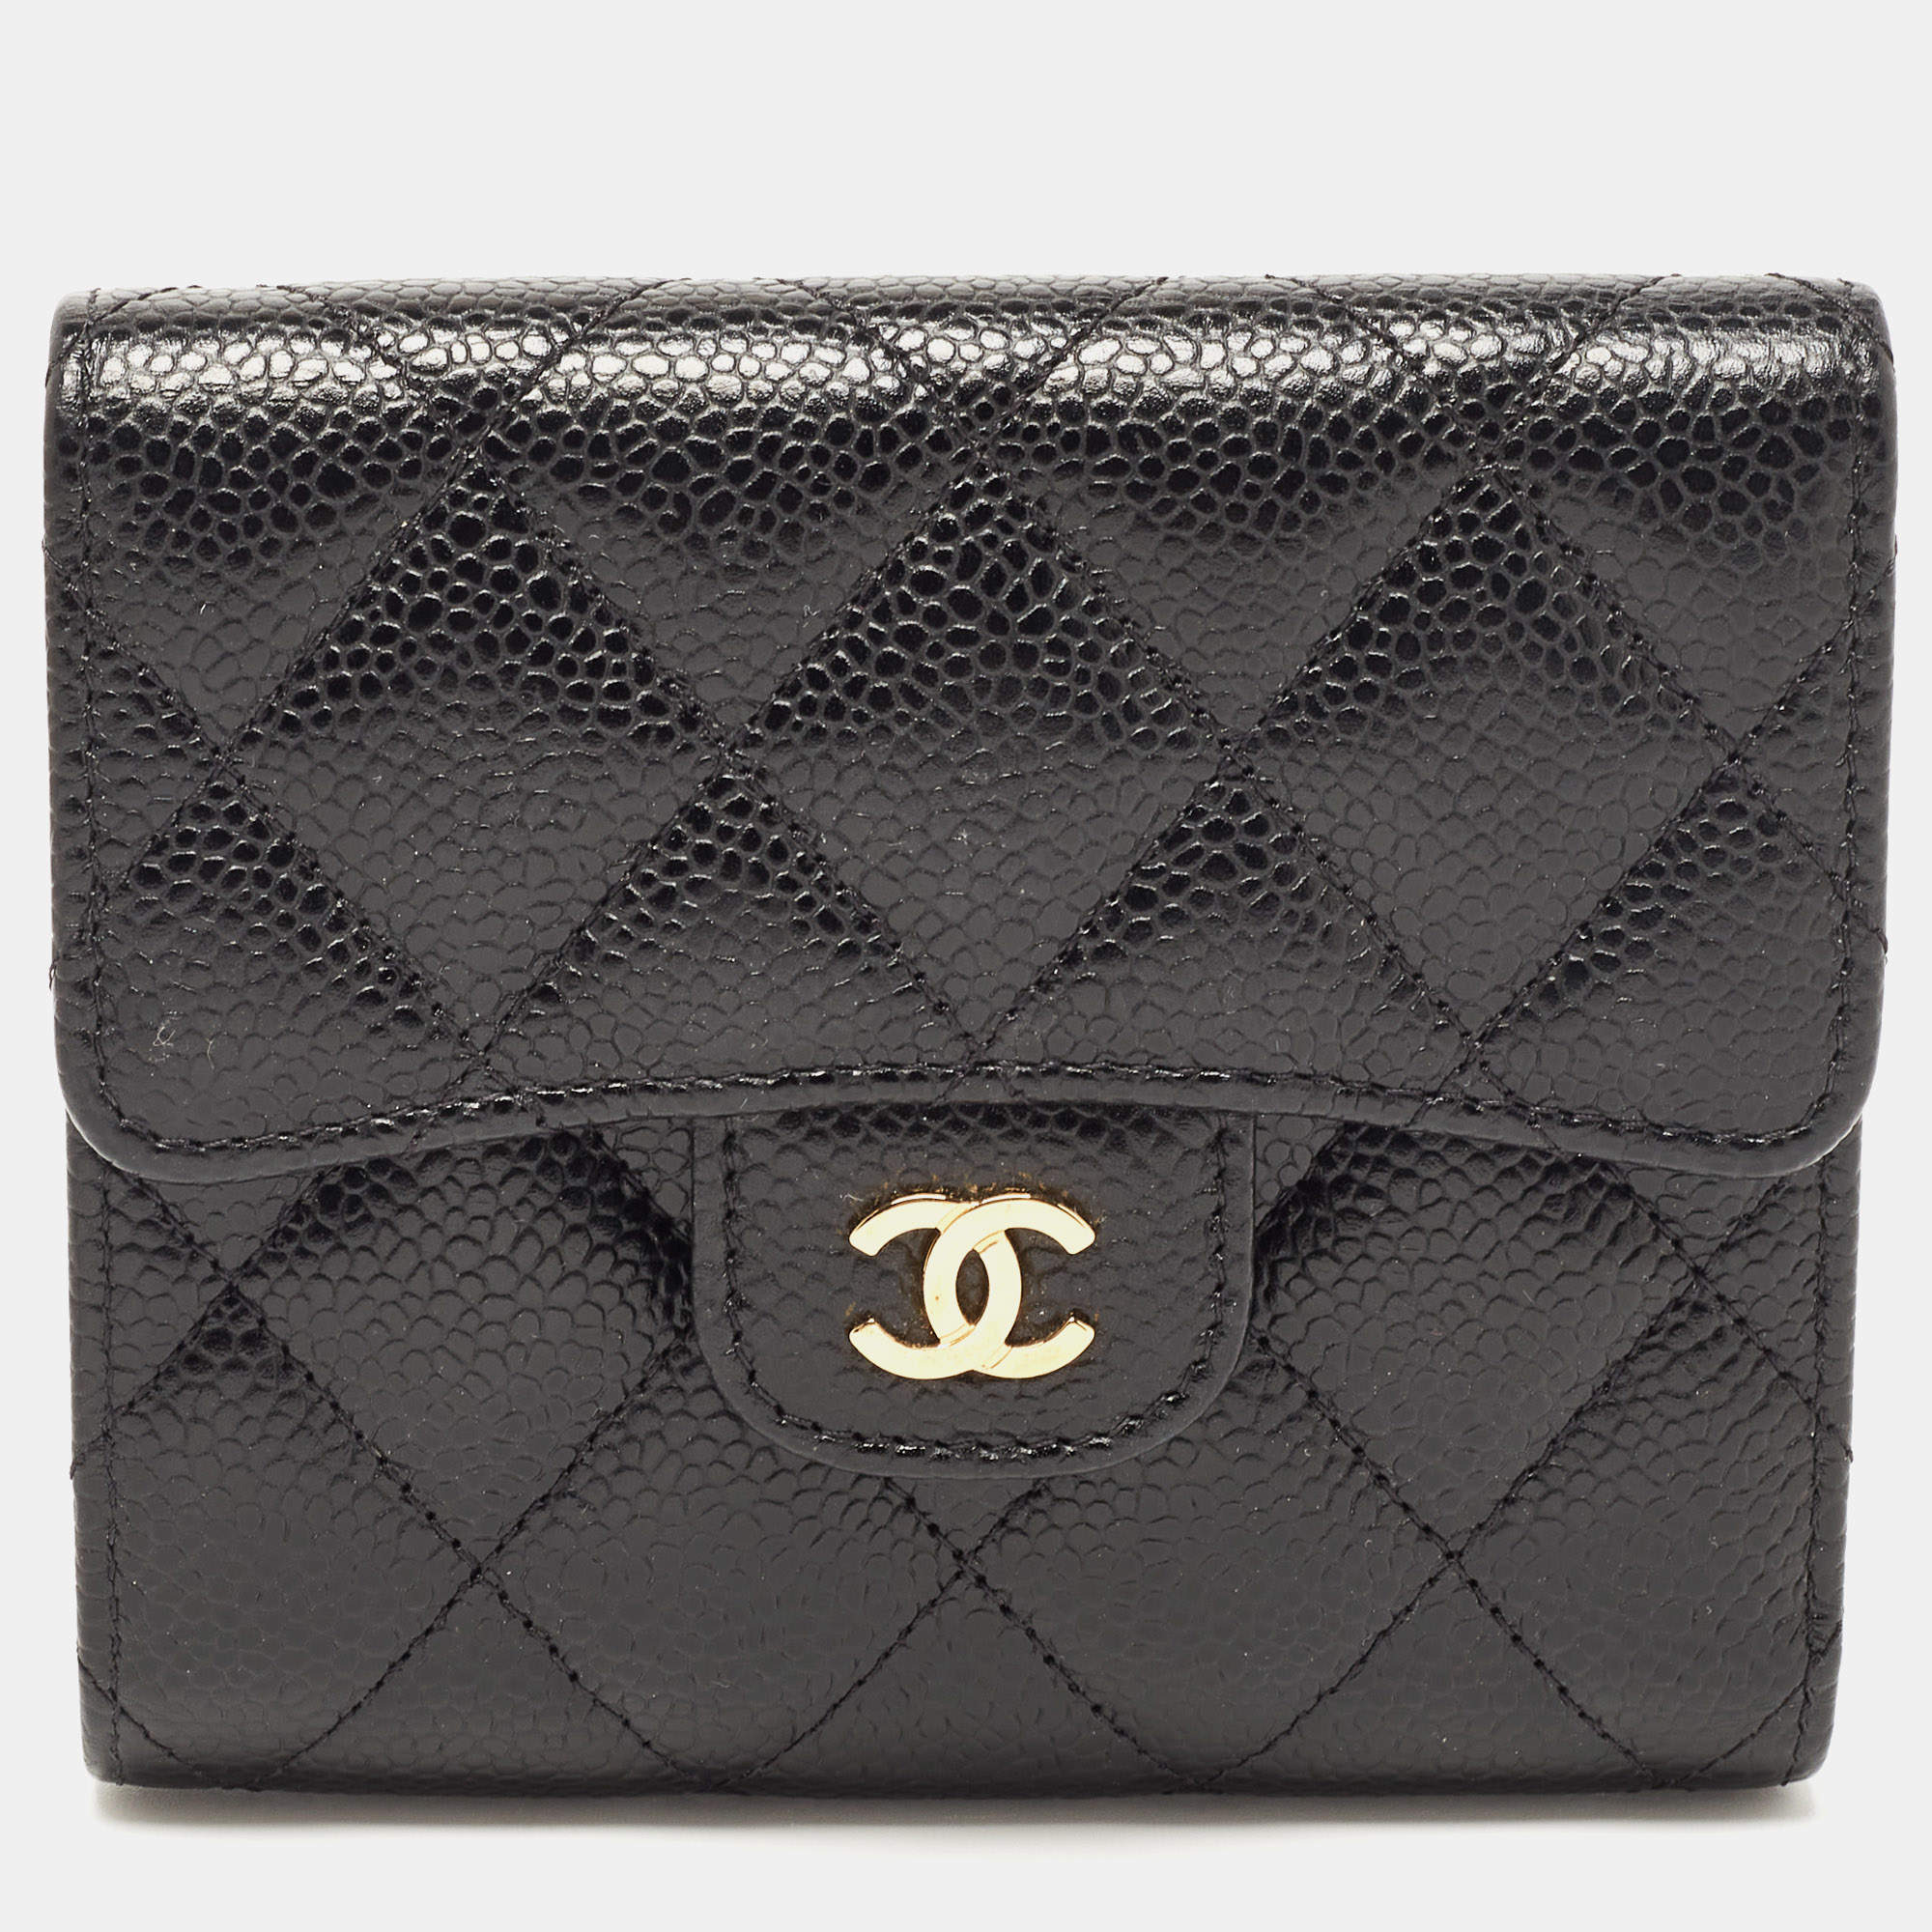 Chanel Black Quilted Caviar Leather Small Classic Flap Wallet